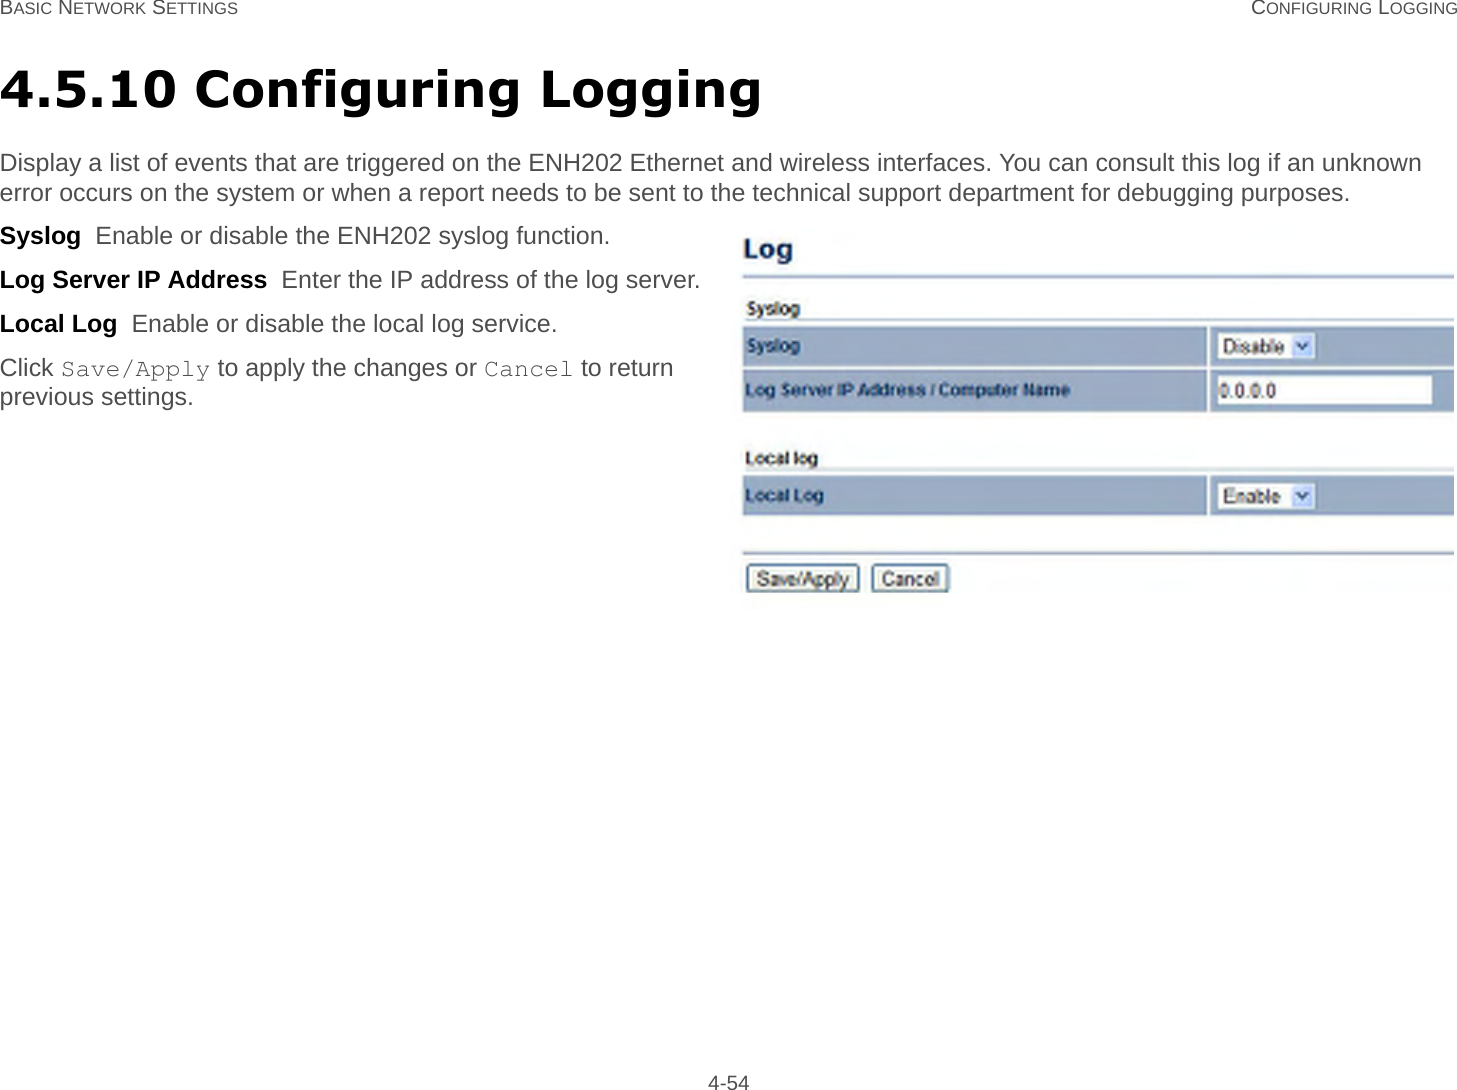 BASIC NETWORK SETTINGS CONFIGURING LOGGING 4-544.5.10 Configuring LoggingDisplay a list of events that are triggered on the ENH202 Ethernet and wireless interfaces. You can consult this log if an unknown error occurs on the system or when a report needs to be sent to the technical support department for debugging purposes.Syslog  Enable or disable the ENH202 syslog function.Log Server IP Address  Enter the IP address of the log server.Local Log  Enable or disable the local log service.Click Save/Apply to apply the changes or Cancel to return previous settings.